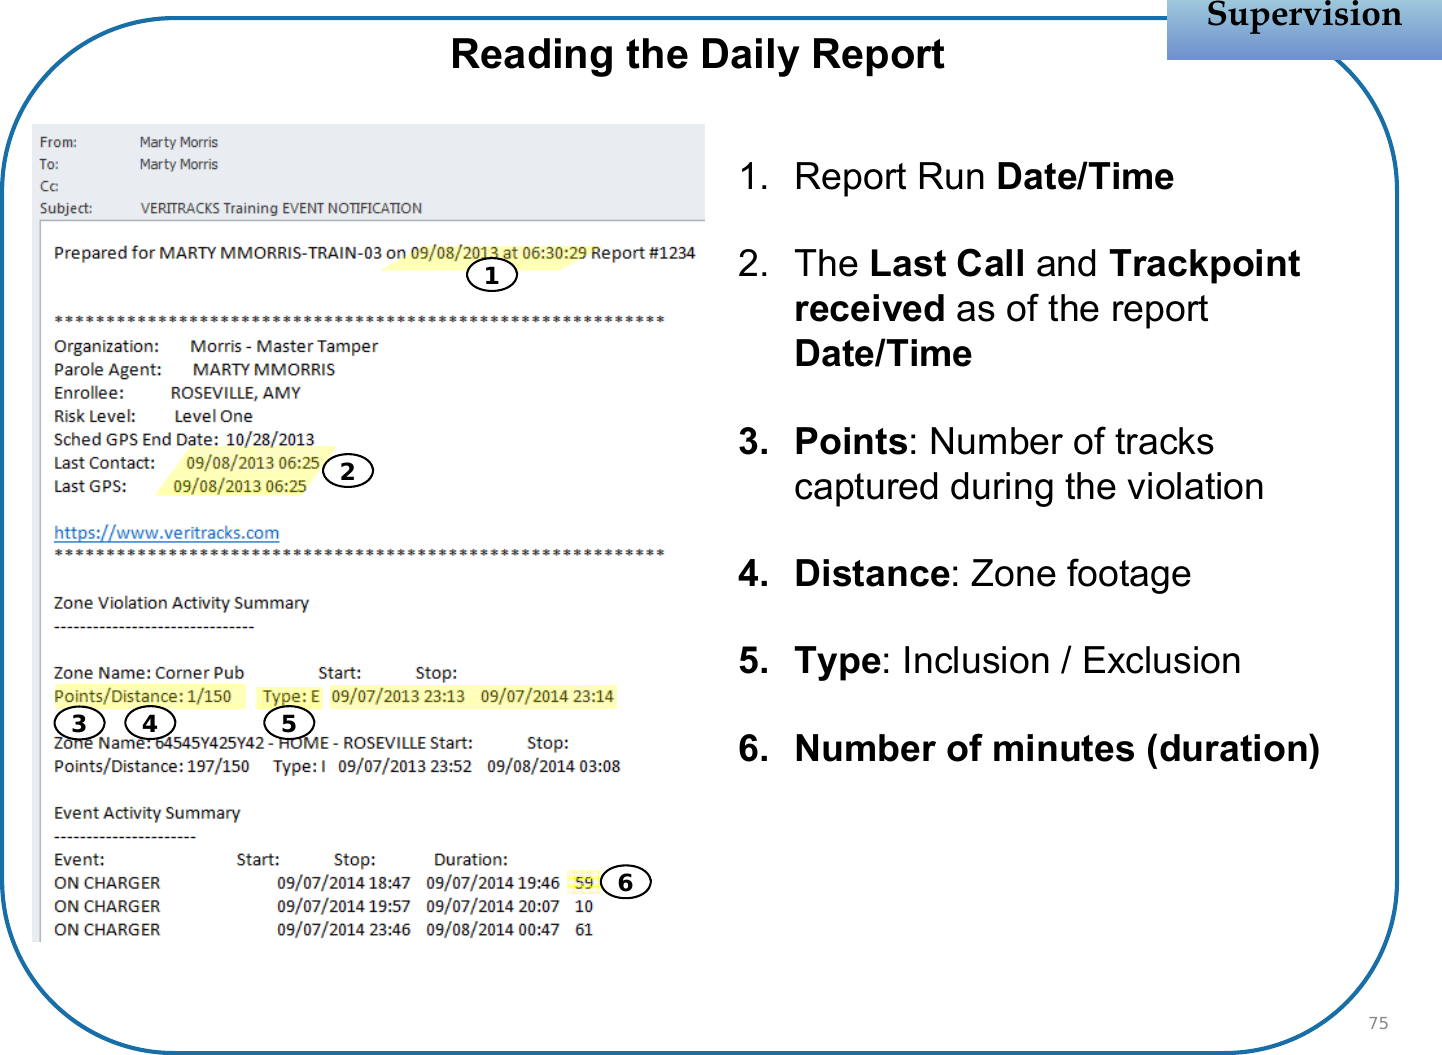 1. Report Run Date/Time2. The Last Call and Trackpointreceived as of the report Date/Time3. Points: Number of tracks captured during the violation4. Distance: Zone footage5. Type: Inclusion / Exclusion6. Number of minutes (duration)SupervisionSupervision75Reading the Daily Report654321